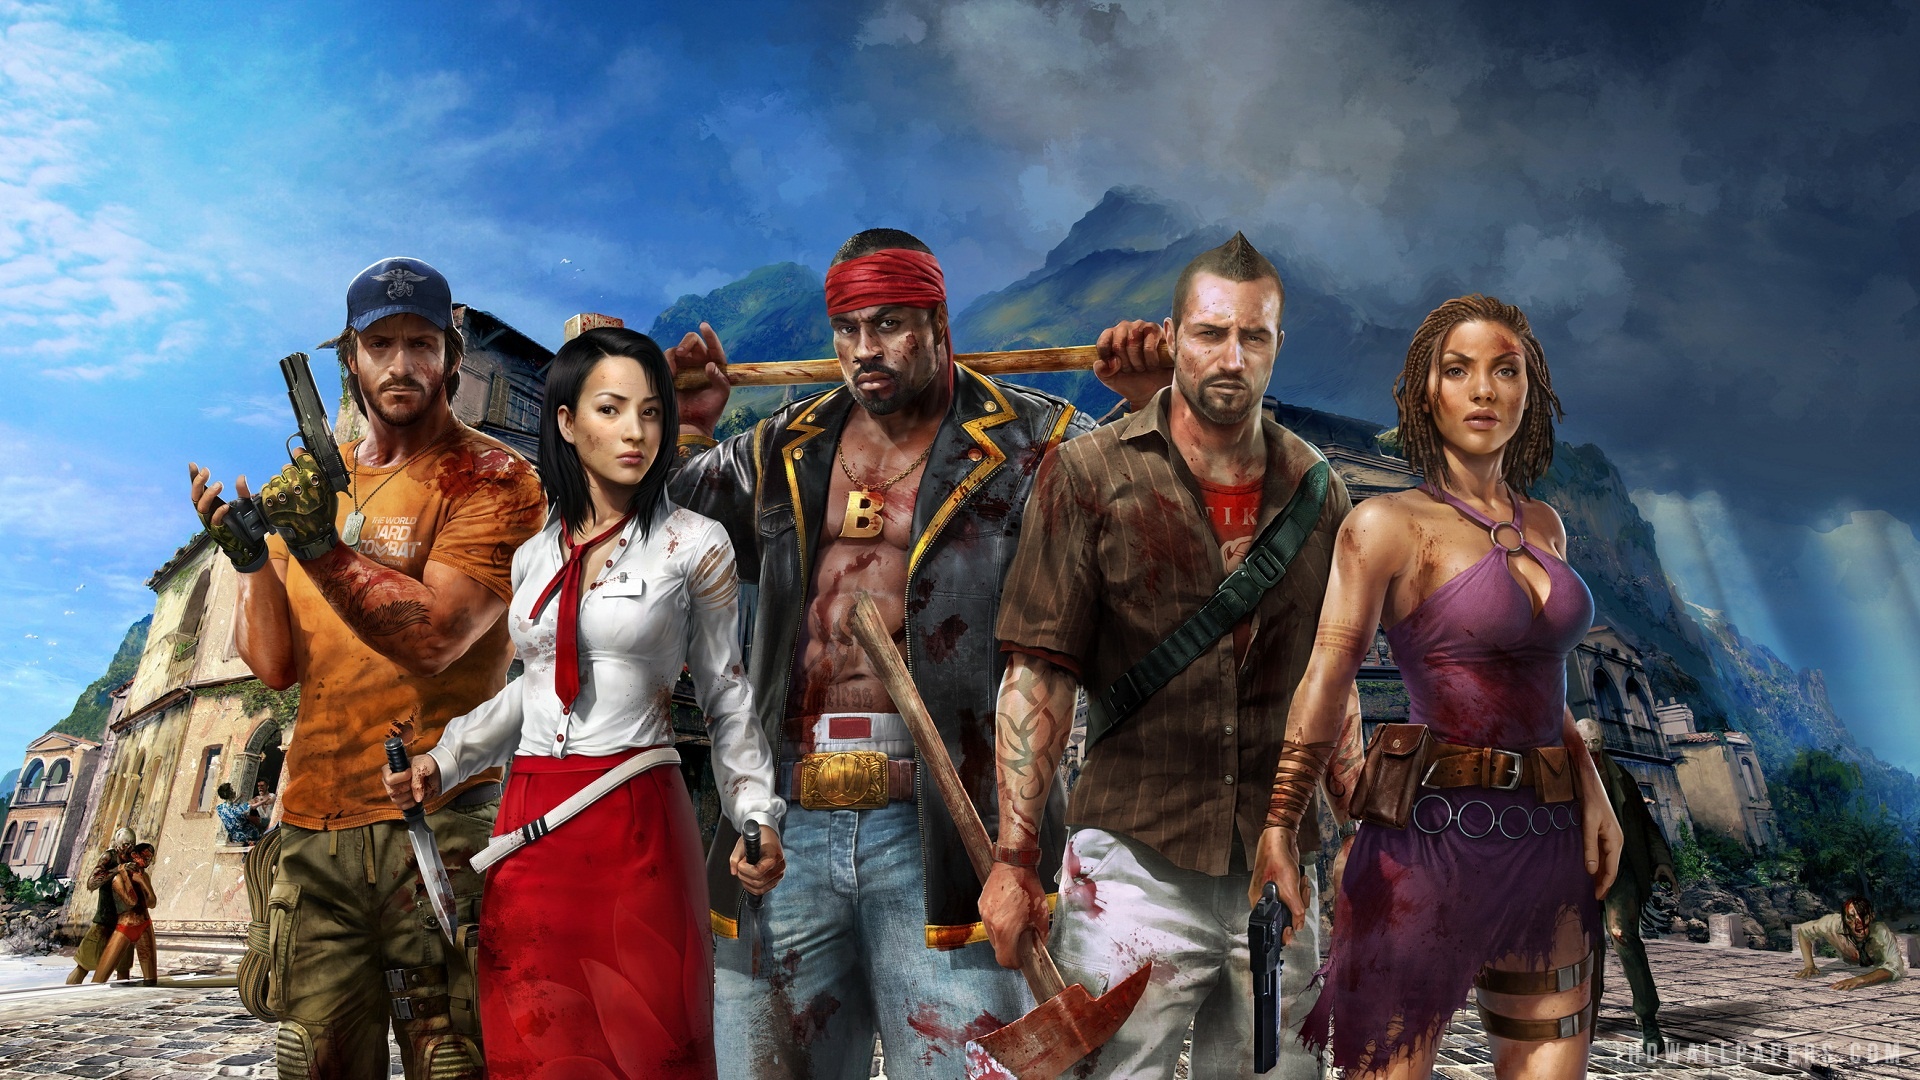 download the new version for iphoneDead Island 2